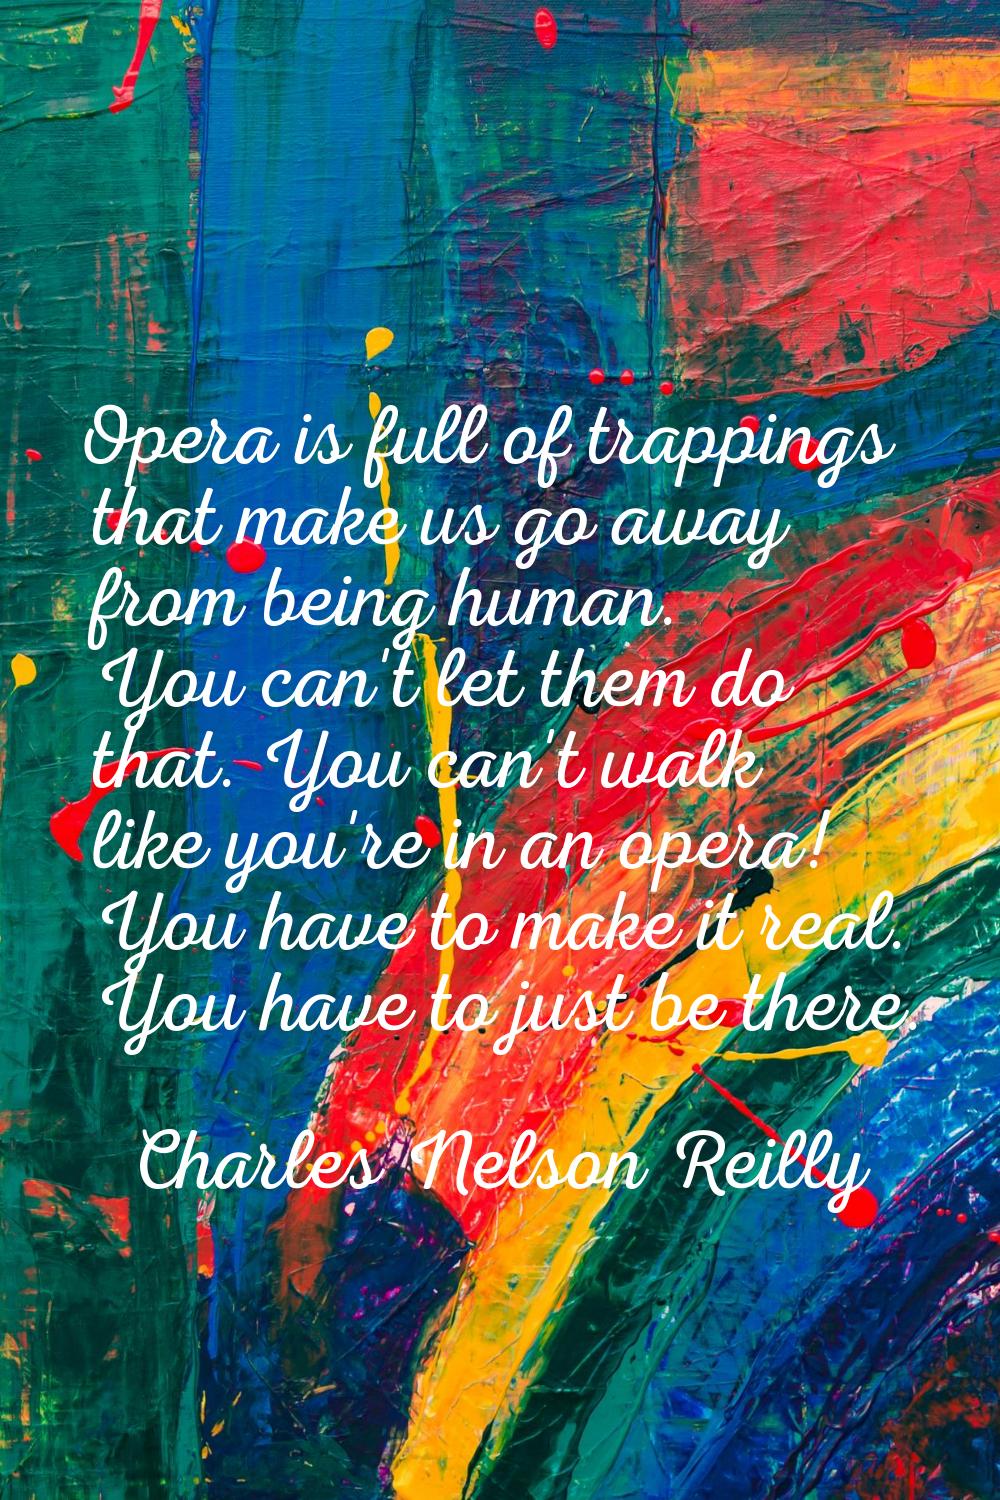 Opera is full of trappings that make us go away from being human. You can't let them do that. You c